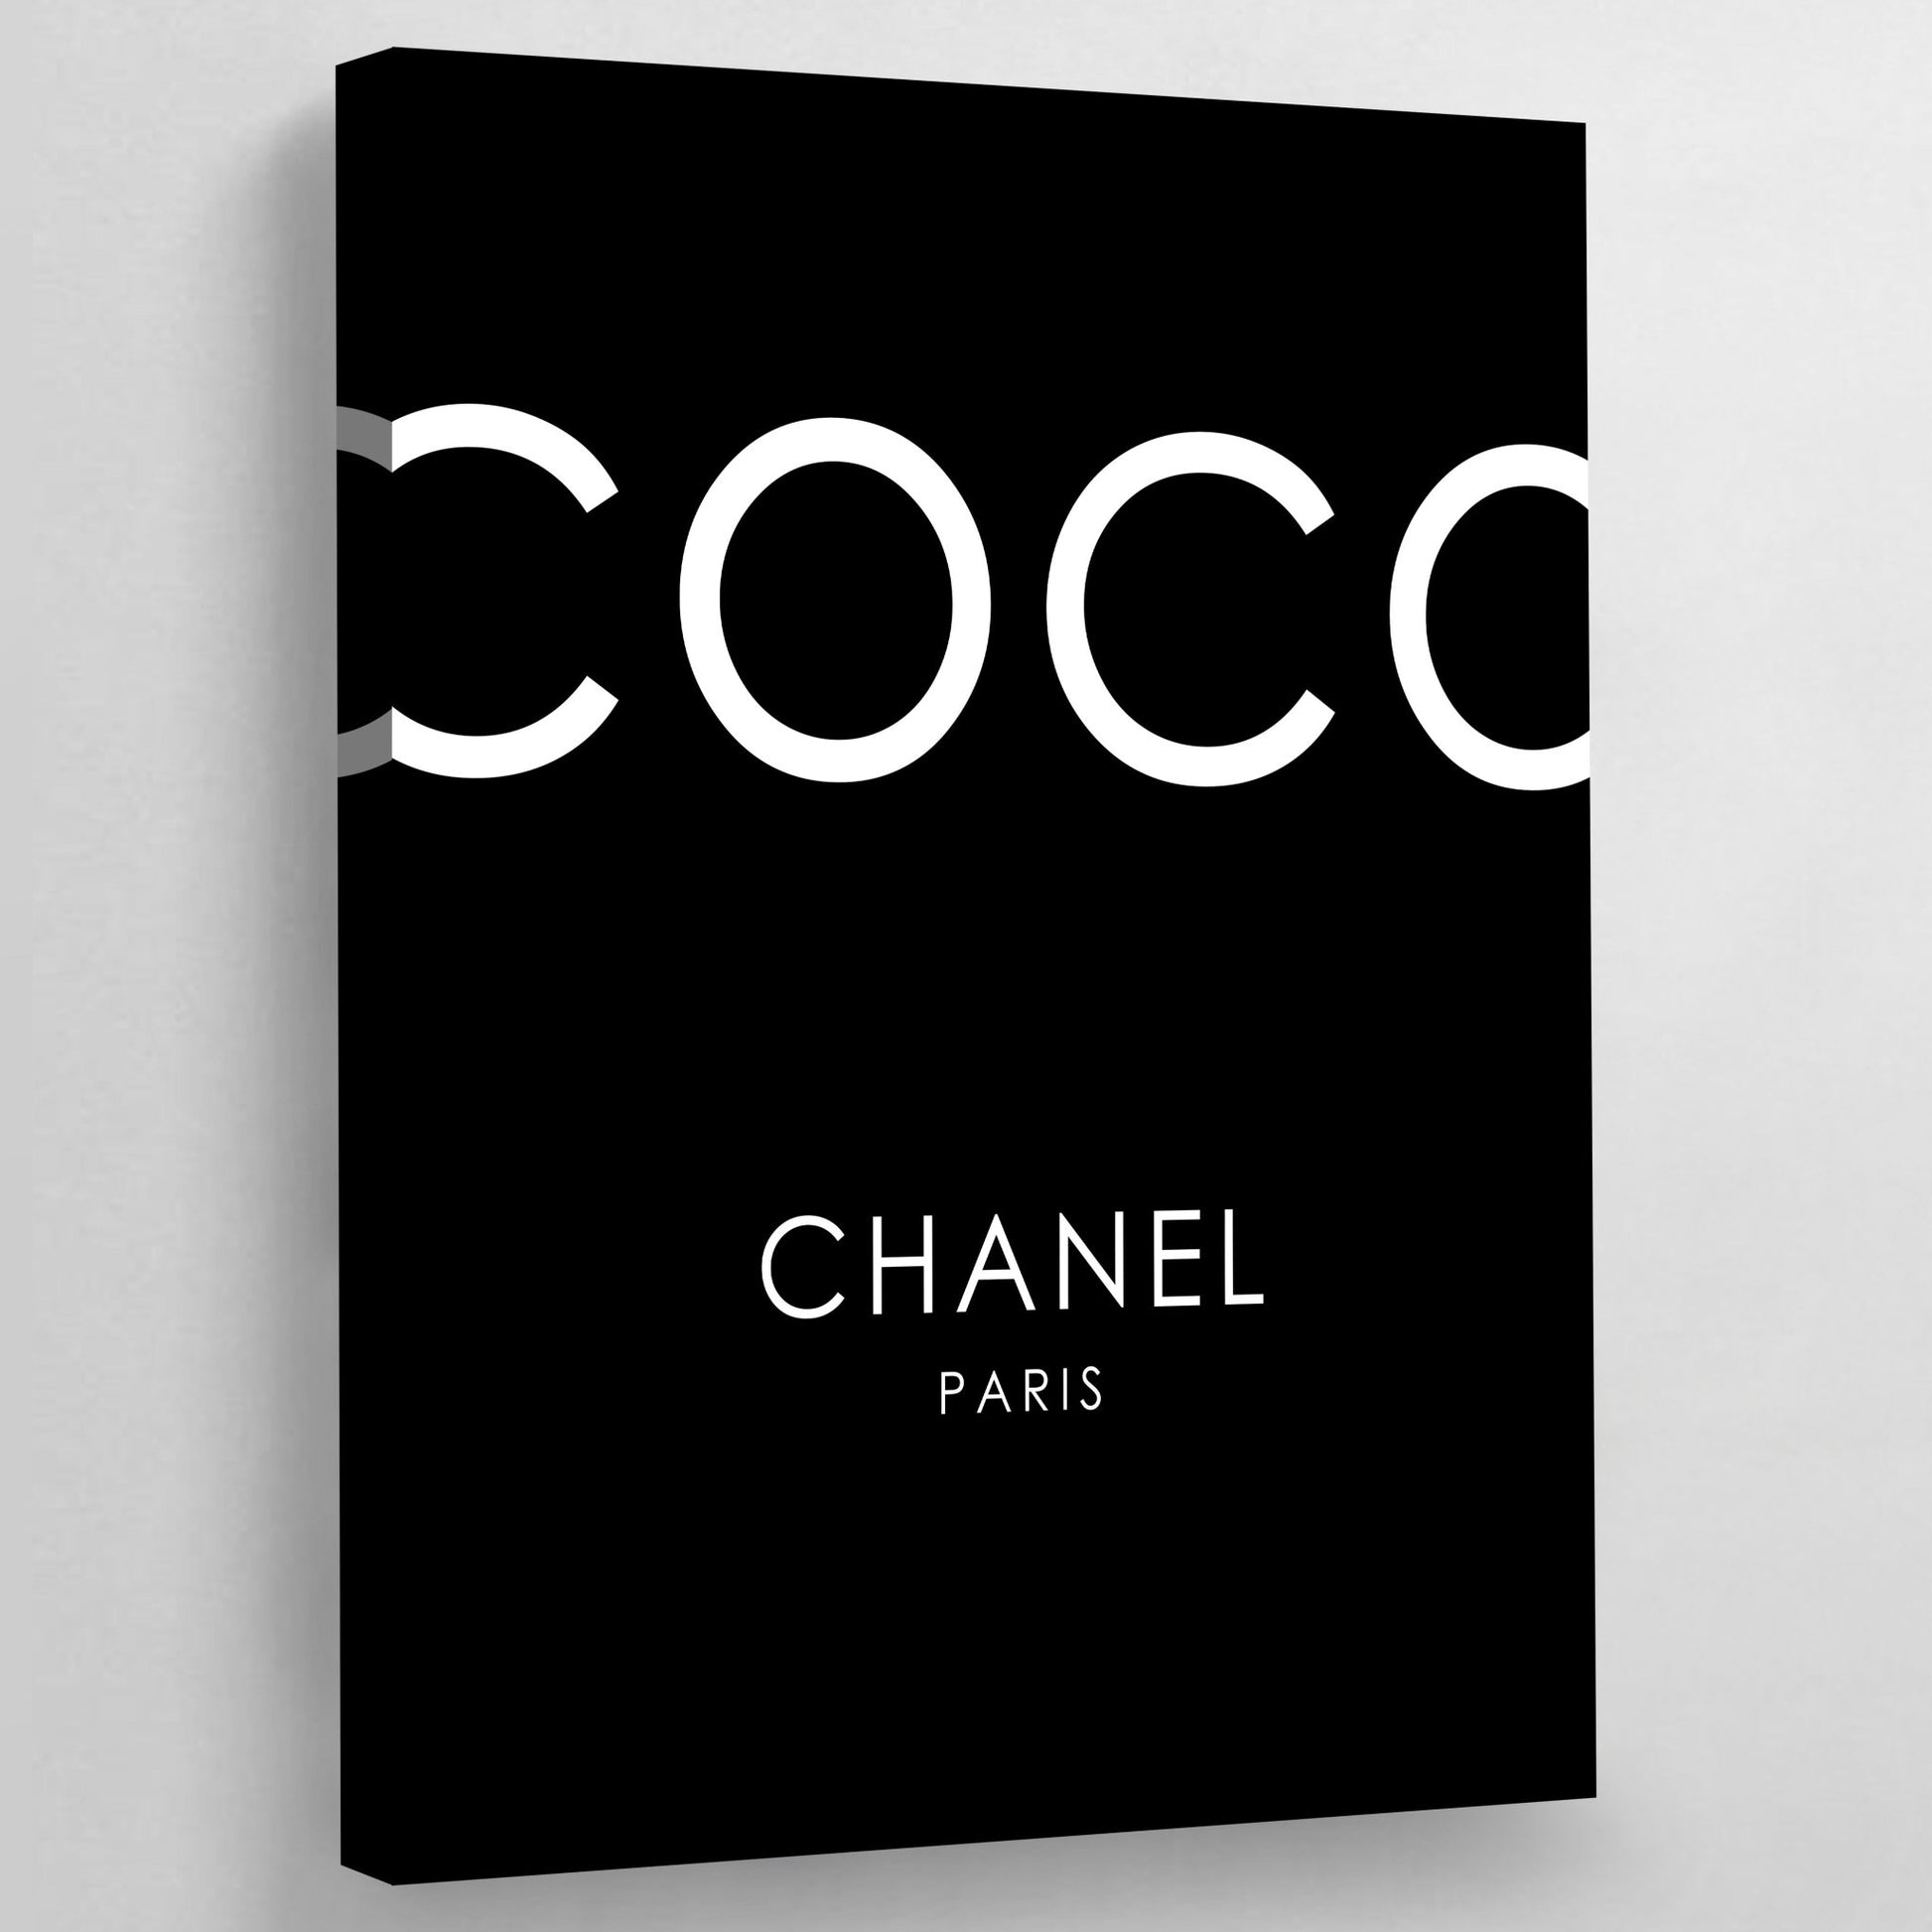 Coco Chanel Art: Canvas Prints, Frames & Posters